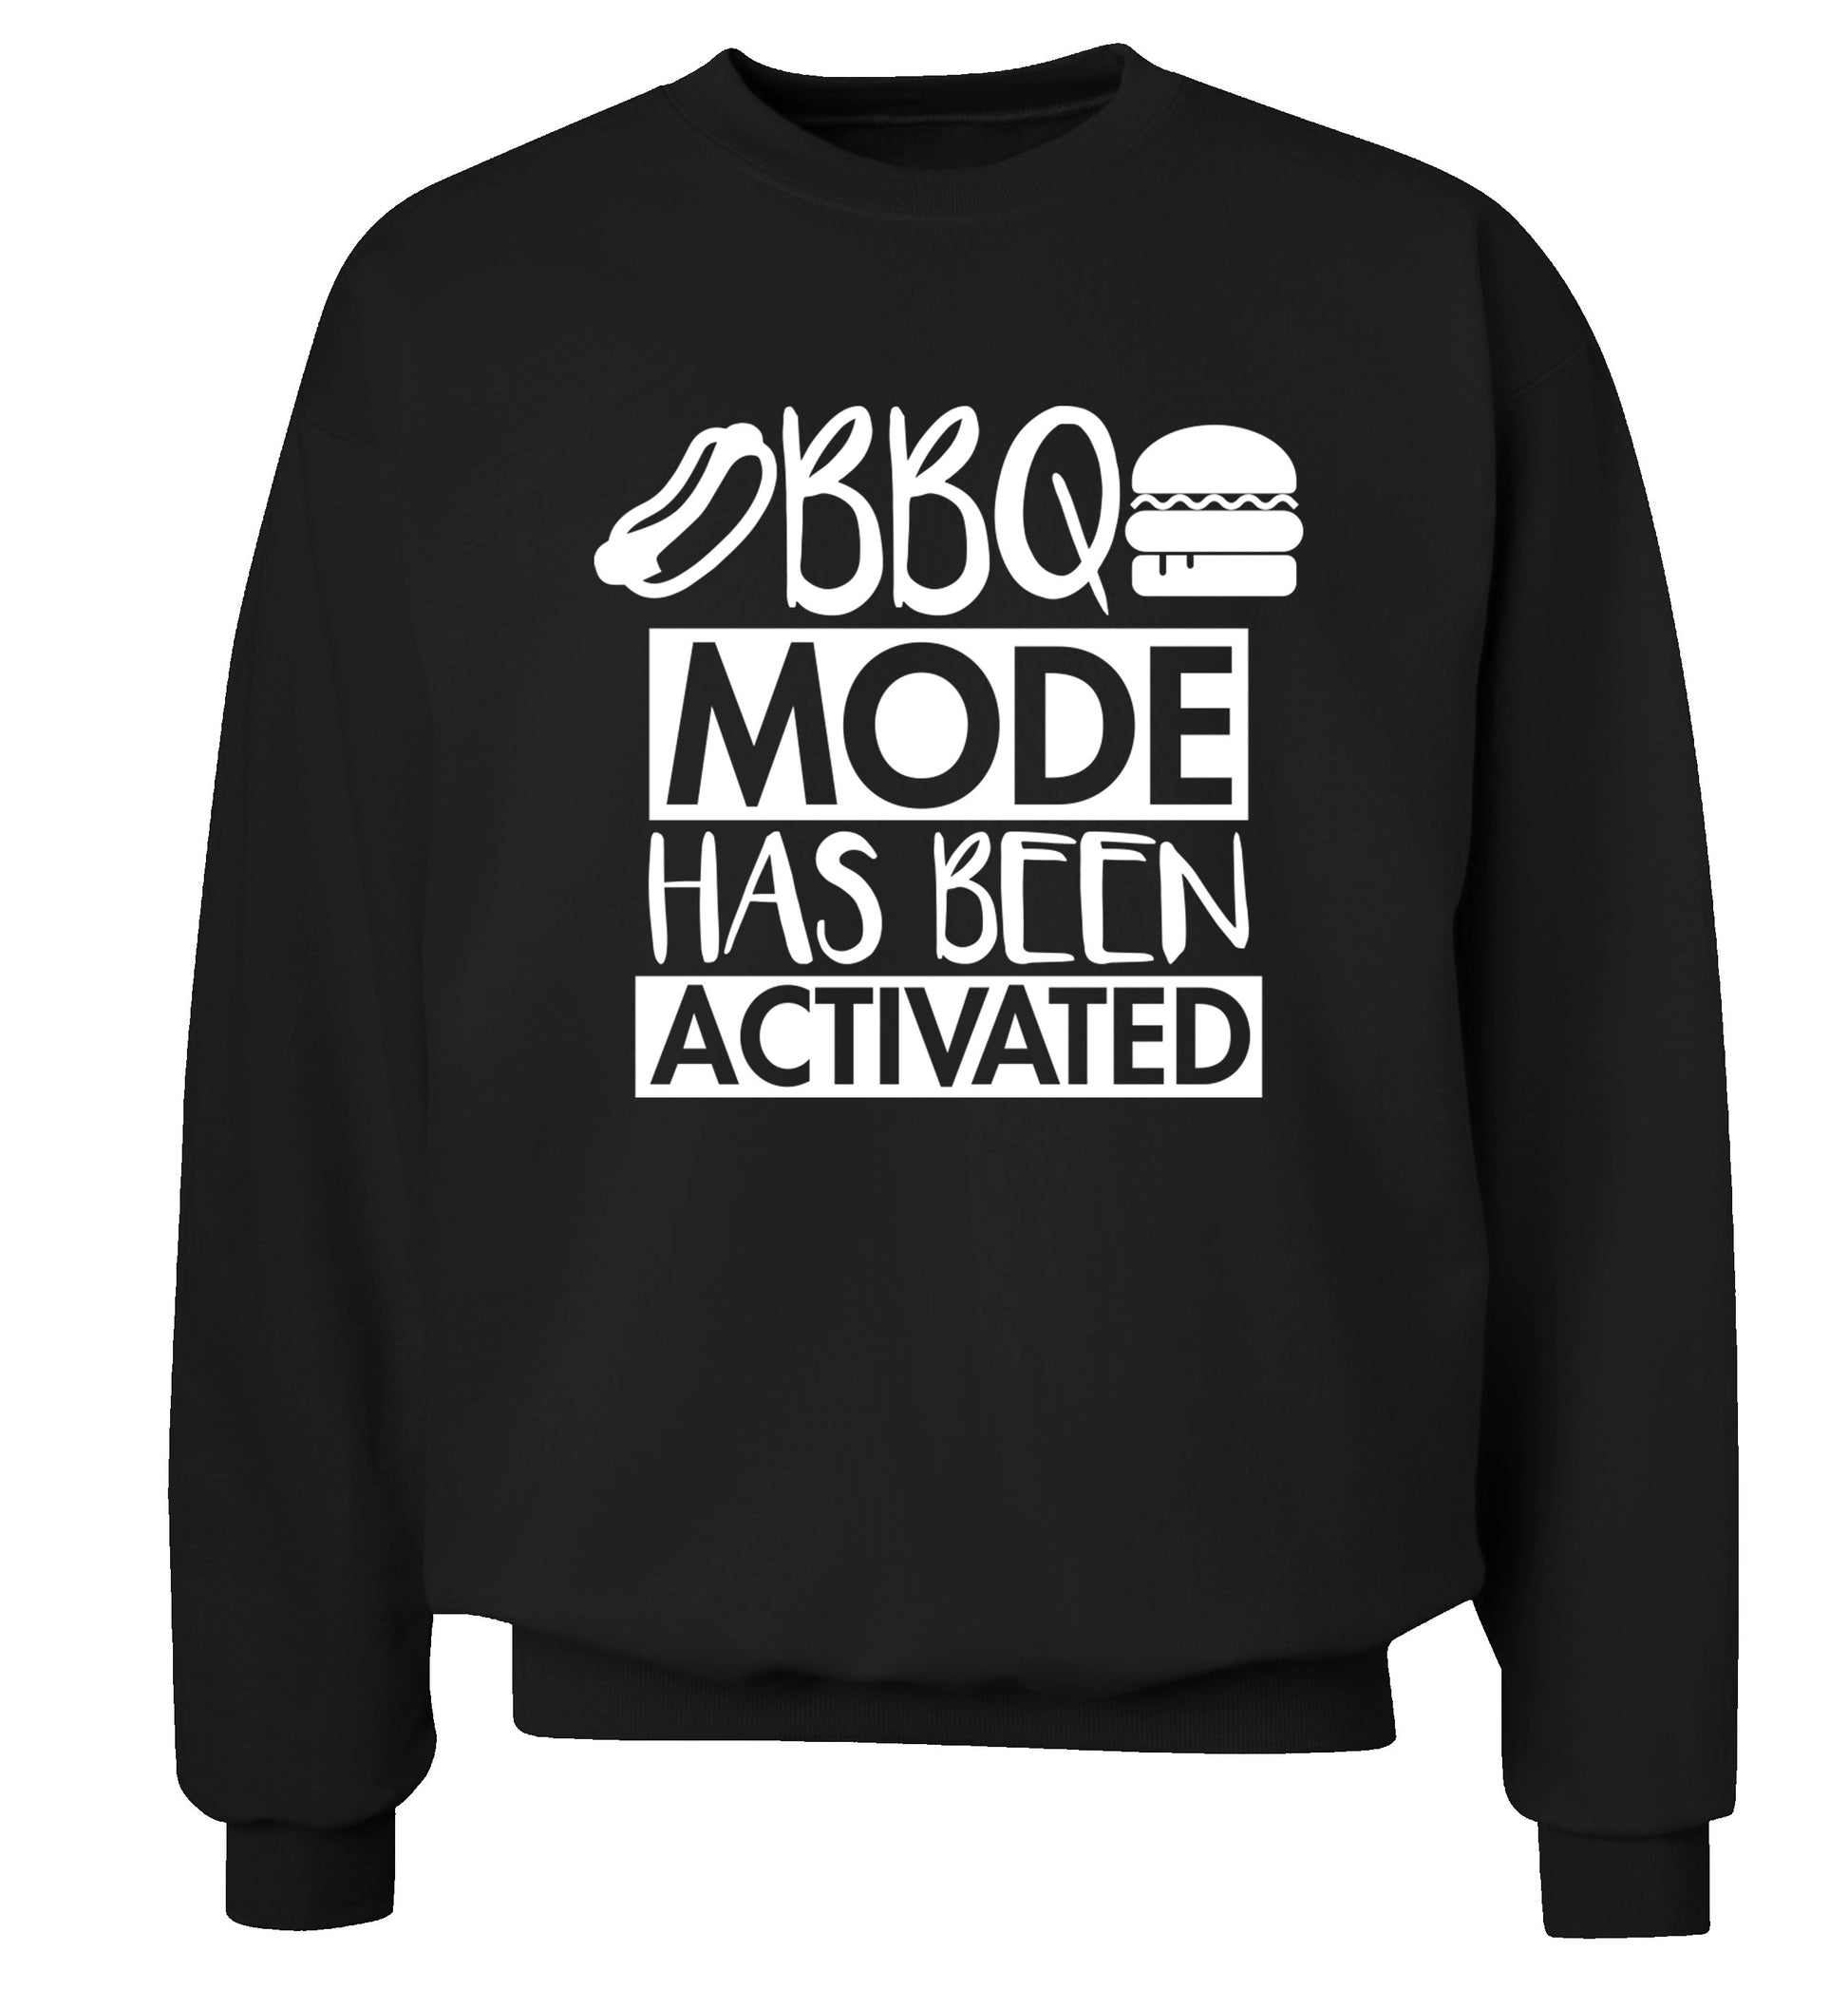 Bbq mode has been activated Adult's unisex black Sweater 2XL